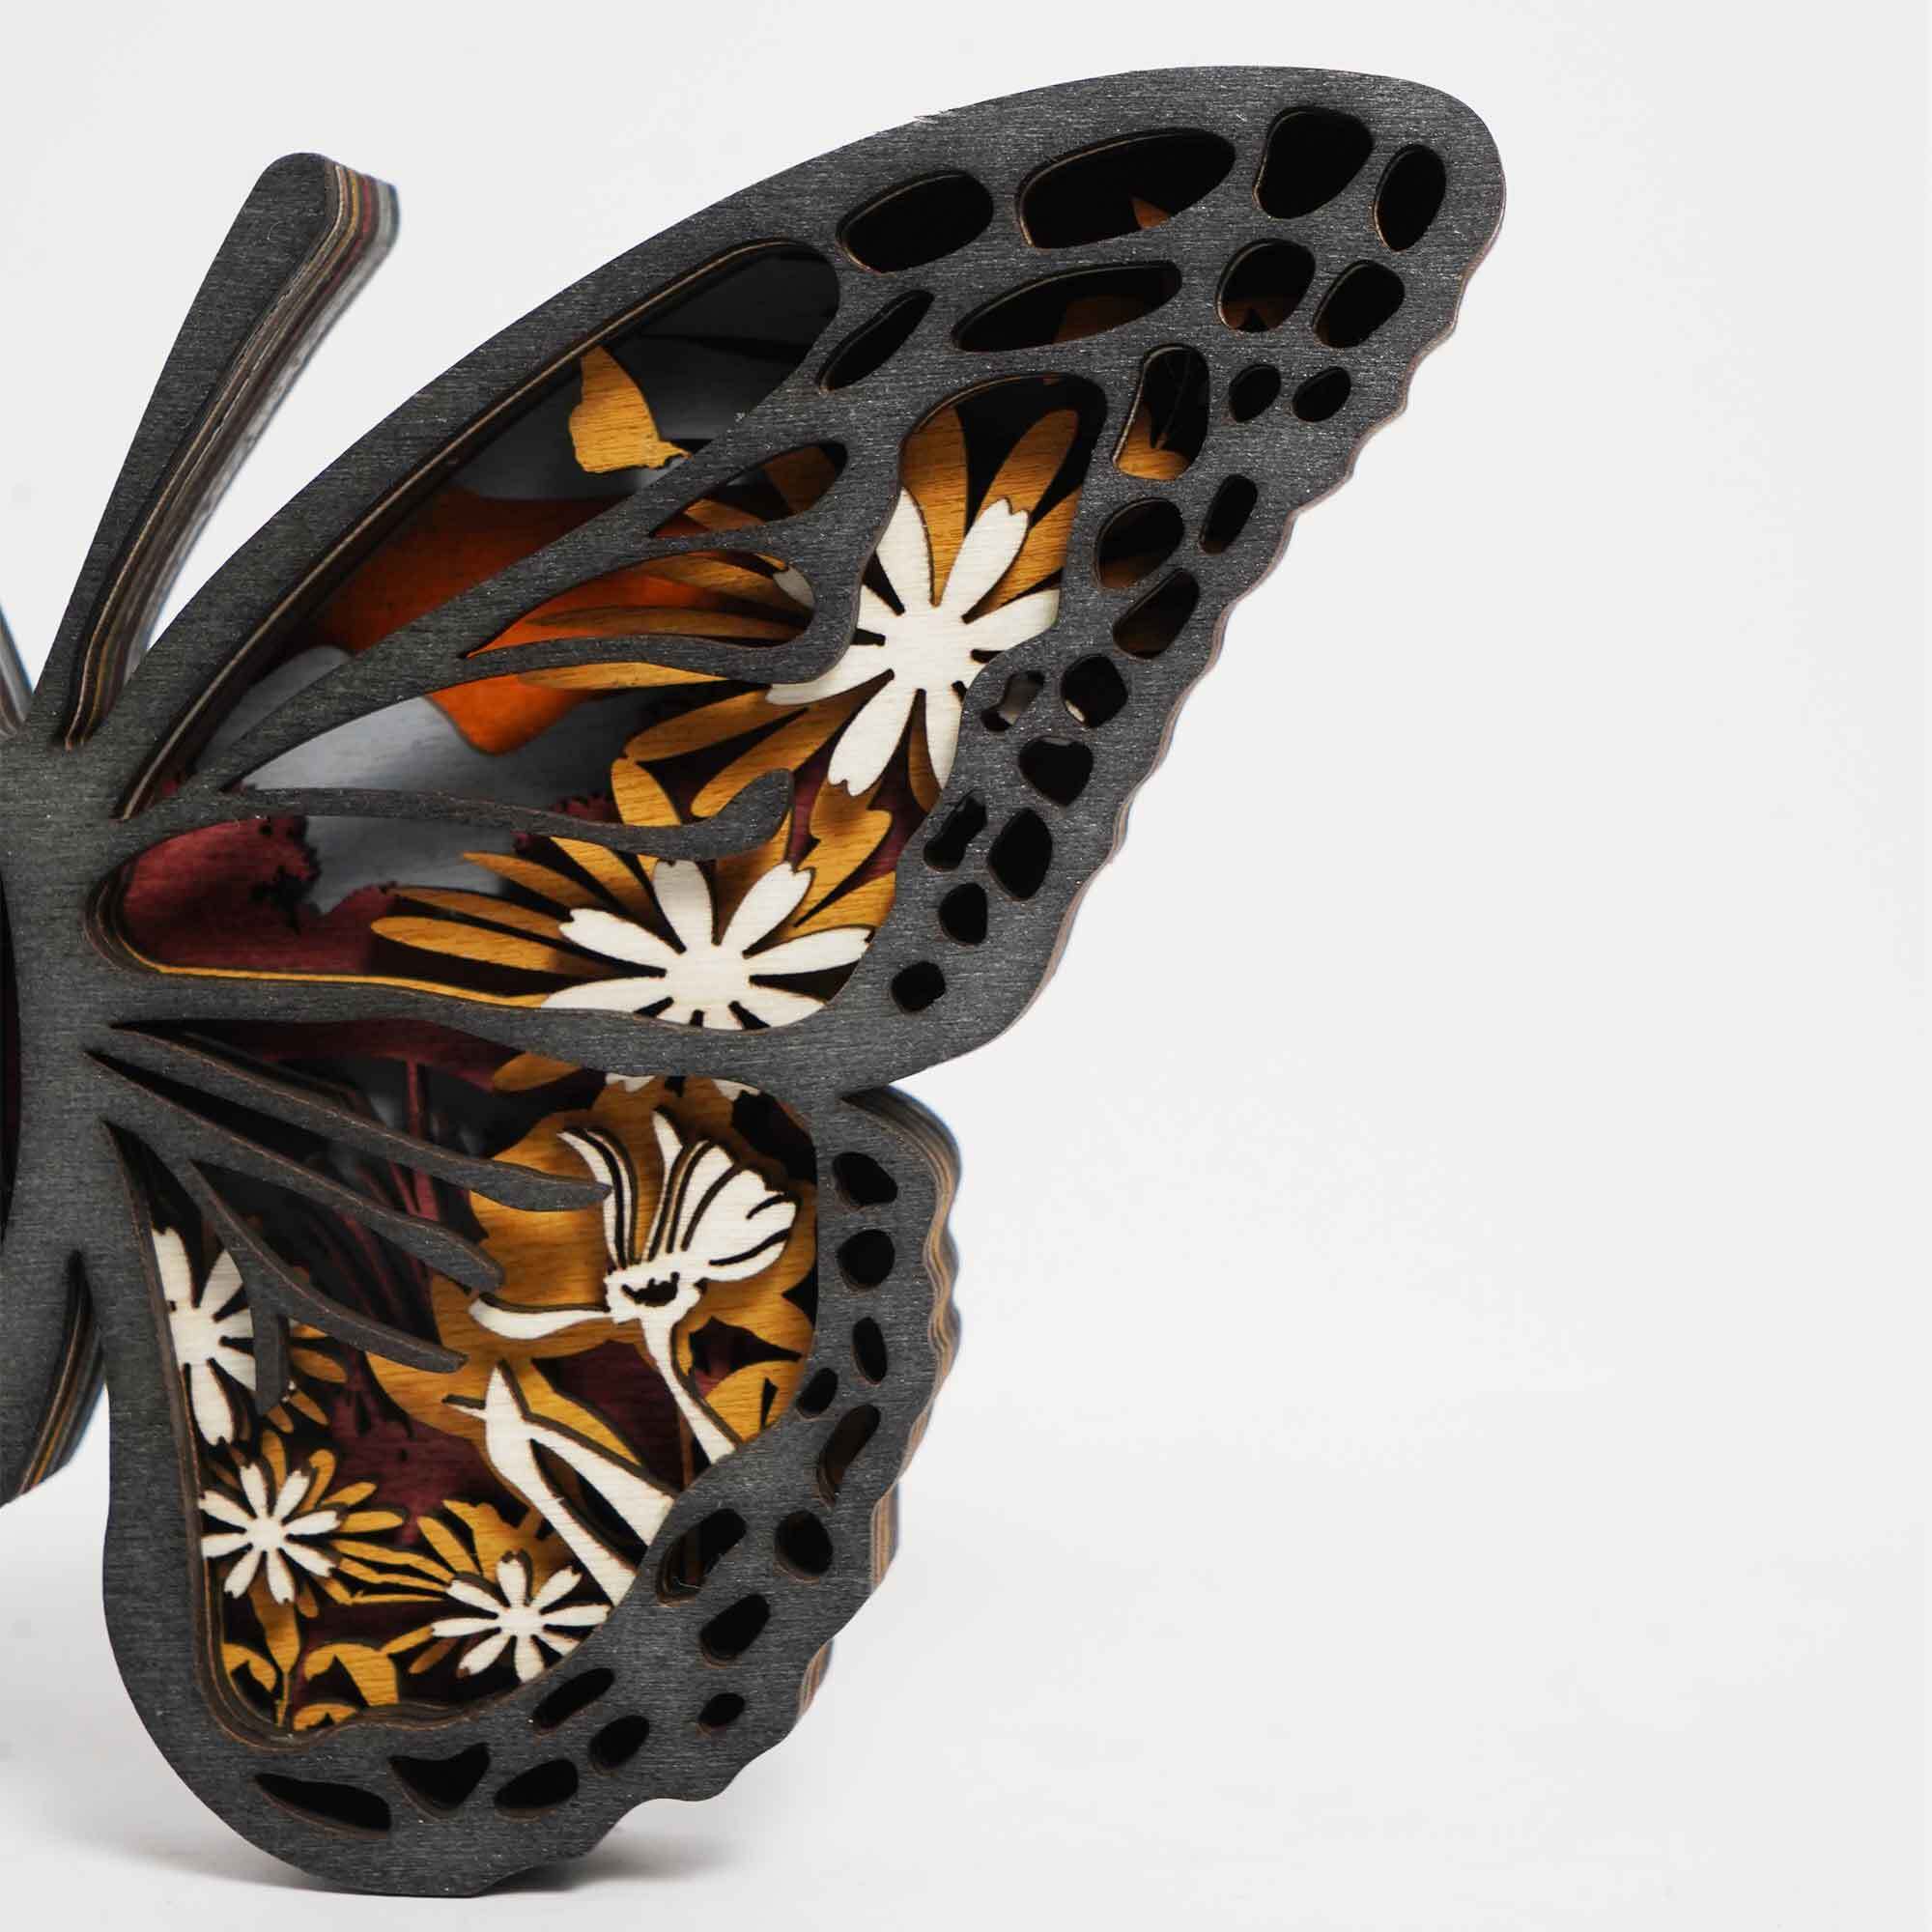 New Arrivals ✨-Monarch butterflies carve crafts by hand